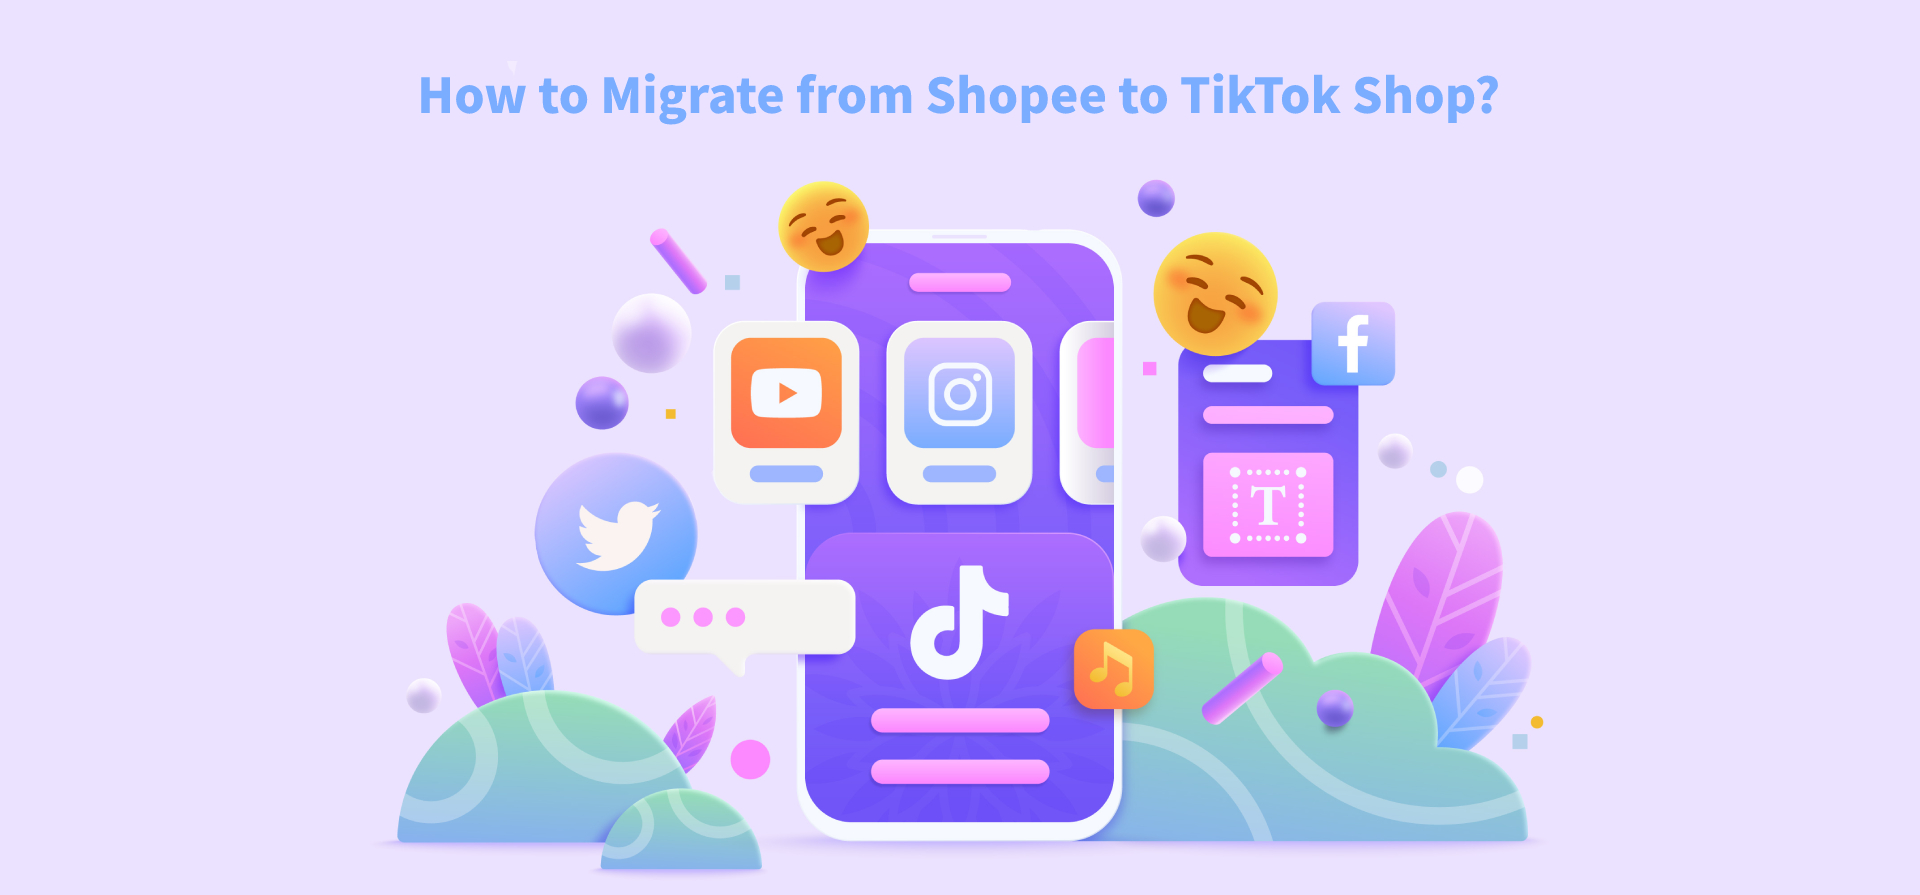 How to Migrate from Shopee to TikTok Shop?